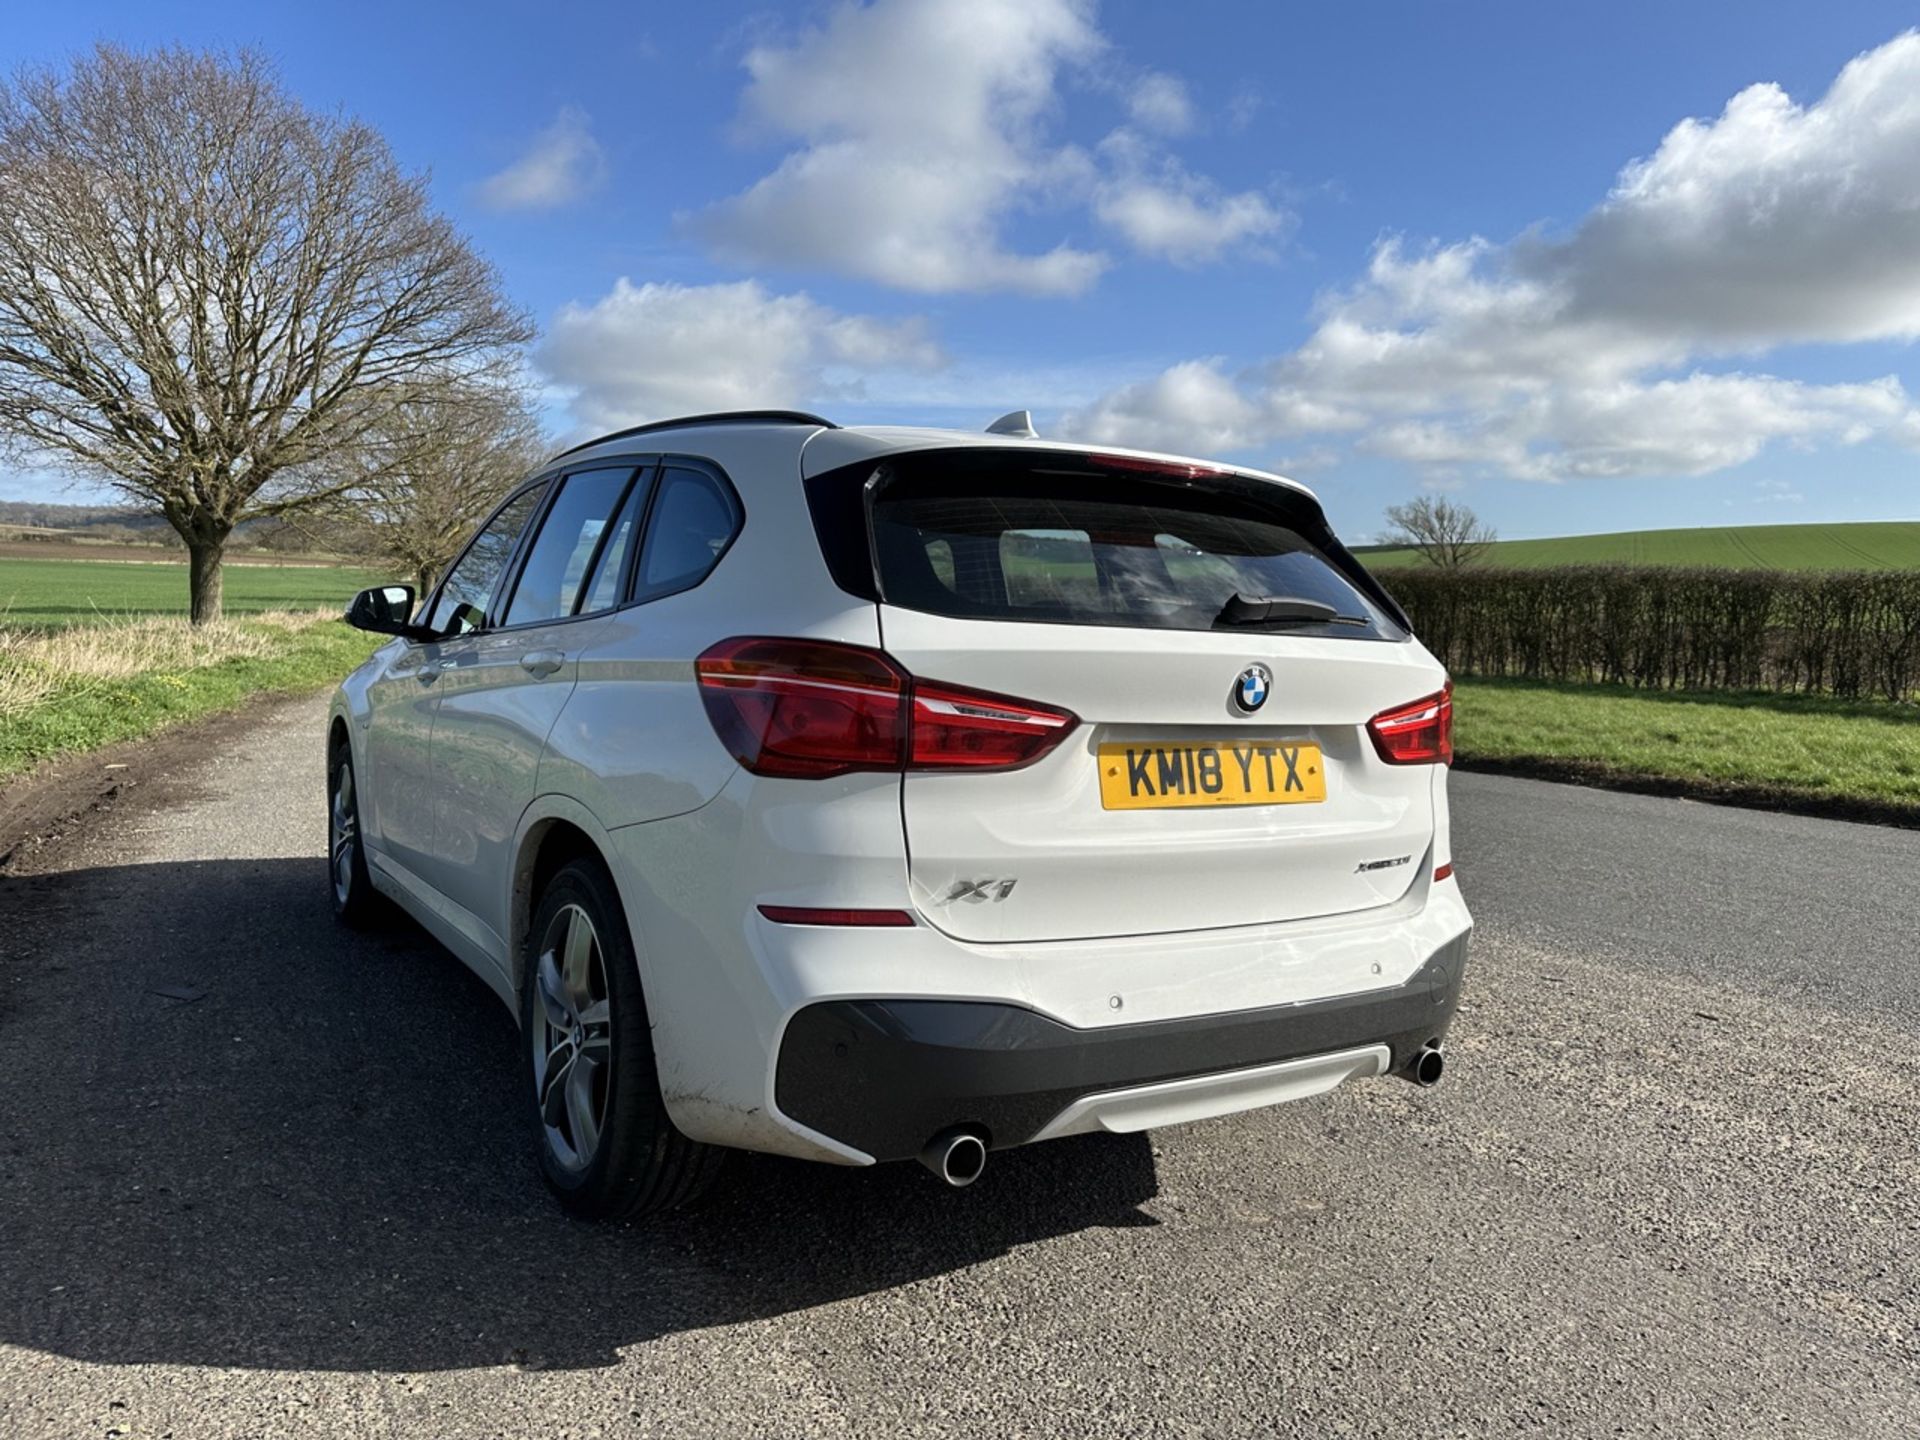 BMW X1 Xdrive20i M Sport Auto 20i - 2018 - 16.5k MILES ONLY - M SPORT Seats/badging - Image 7 of 22